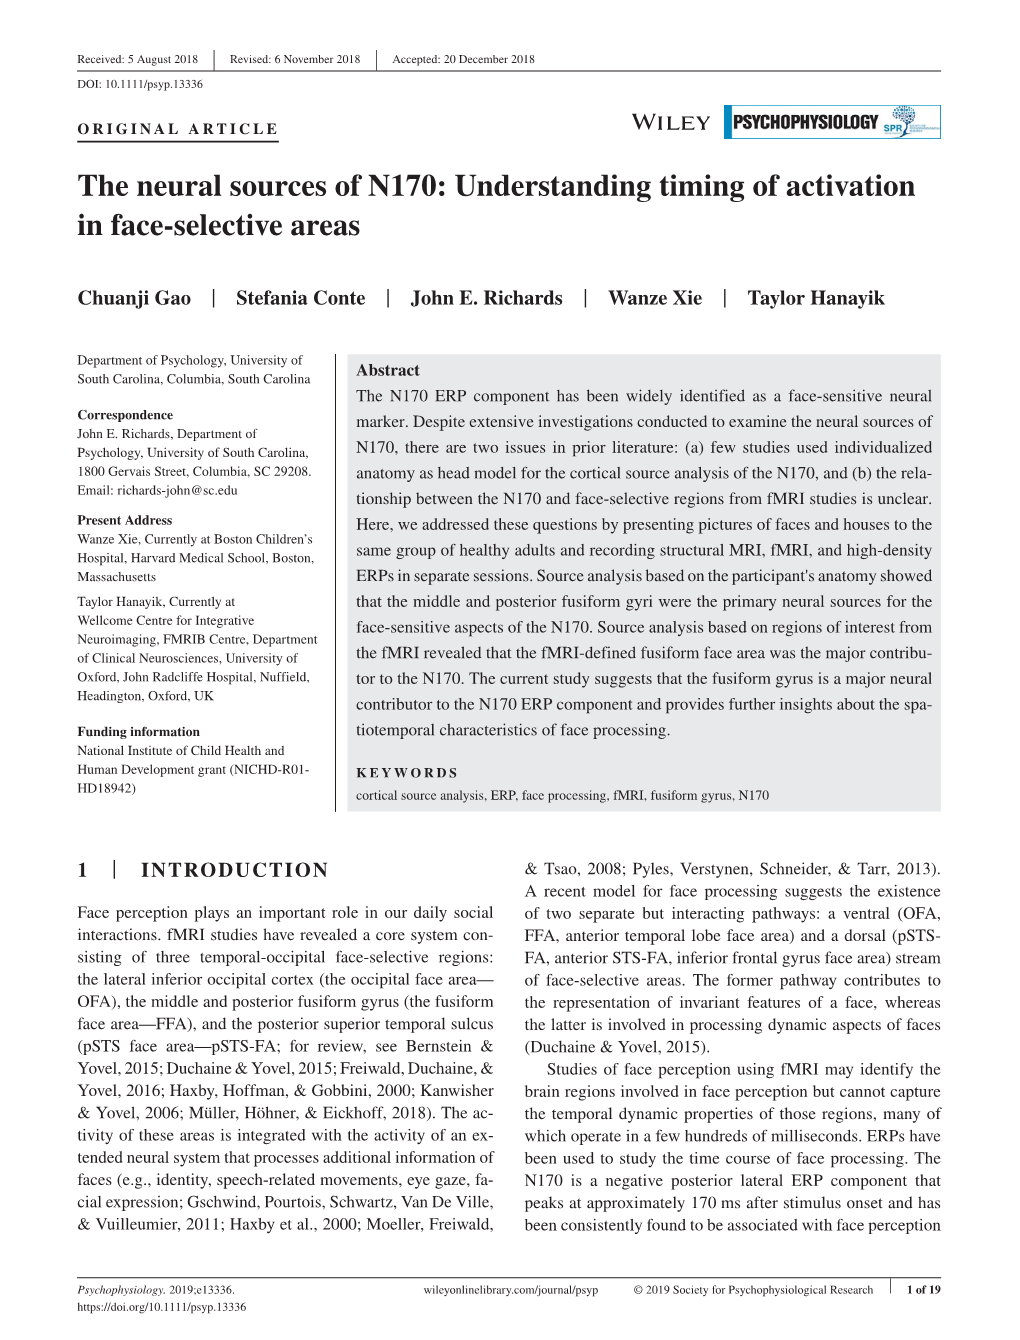 The Neural Sources of N170: Understanding Timing of Activation in Face&#X2010;Selective Areas